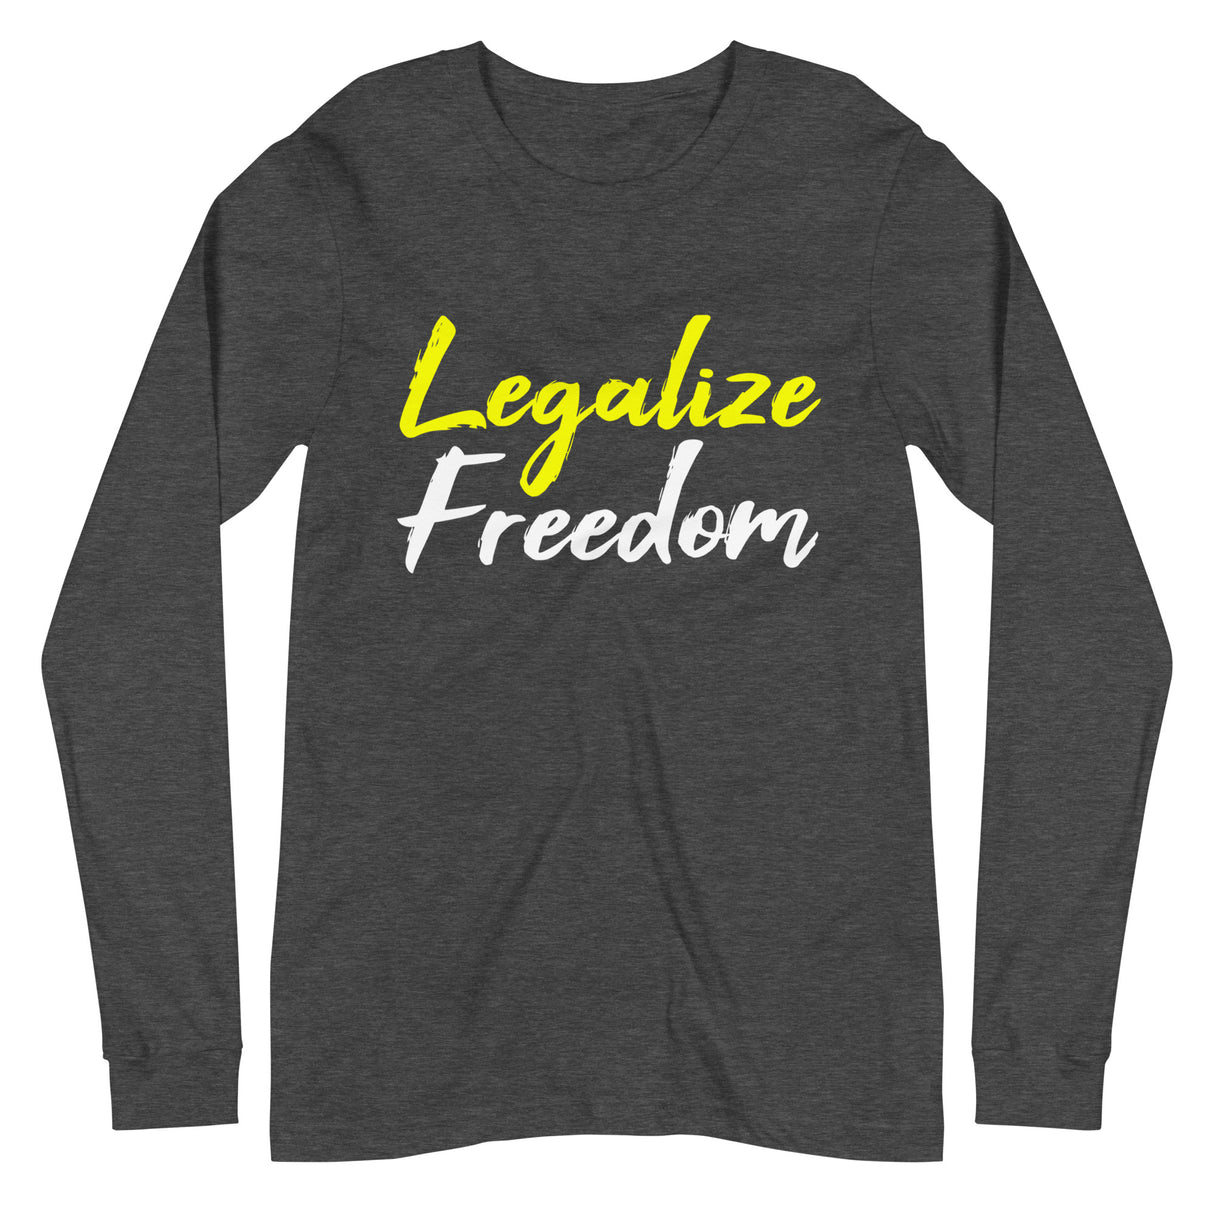 Legalize Freedom Premium Long Sleeve Shirt - Libertarian Country